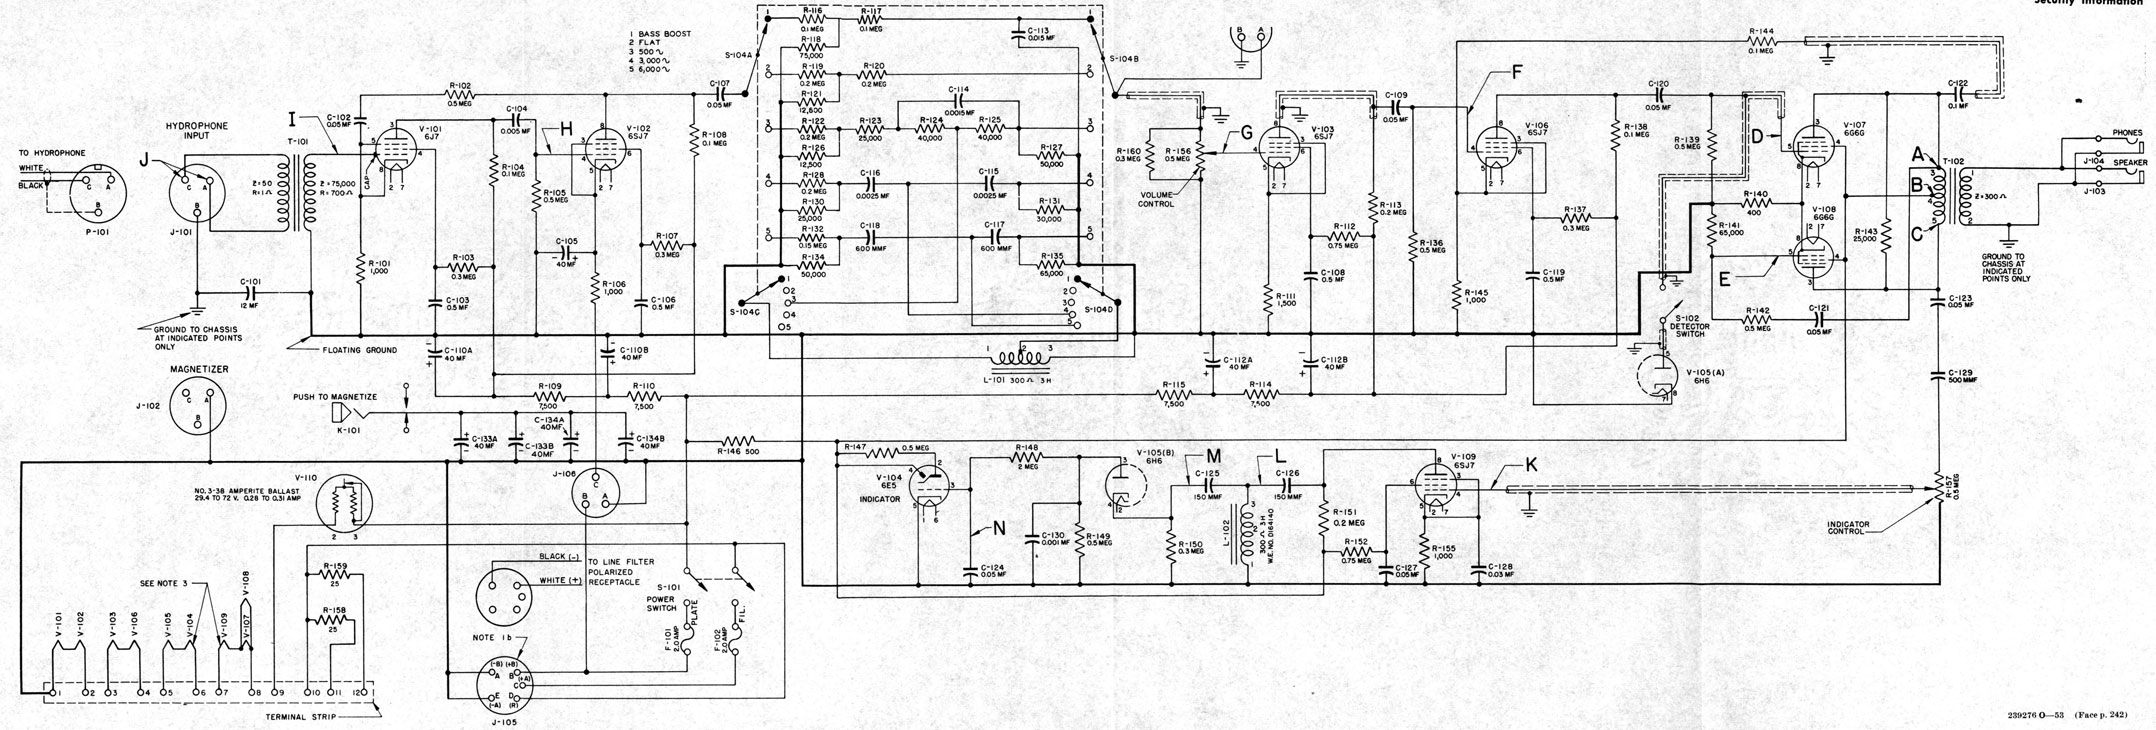 Figure 13-3 -Circuit of the JP-1 audio amplifier with line filter.